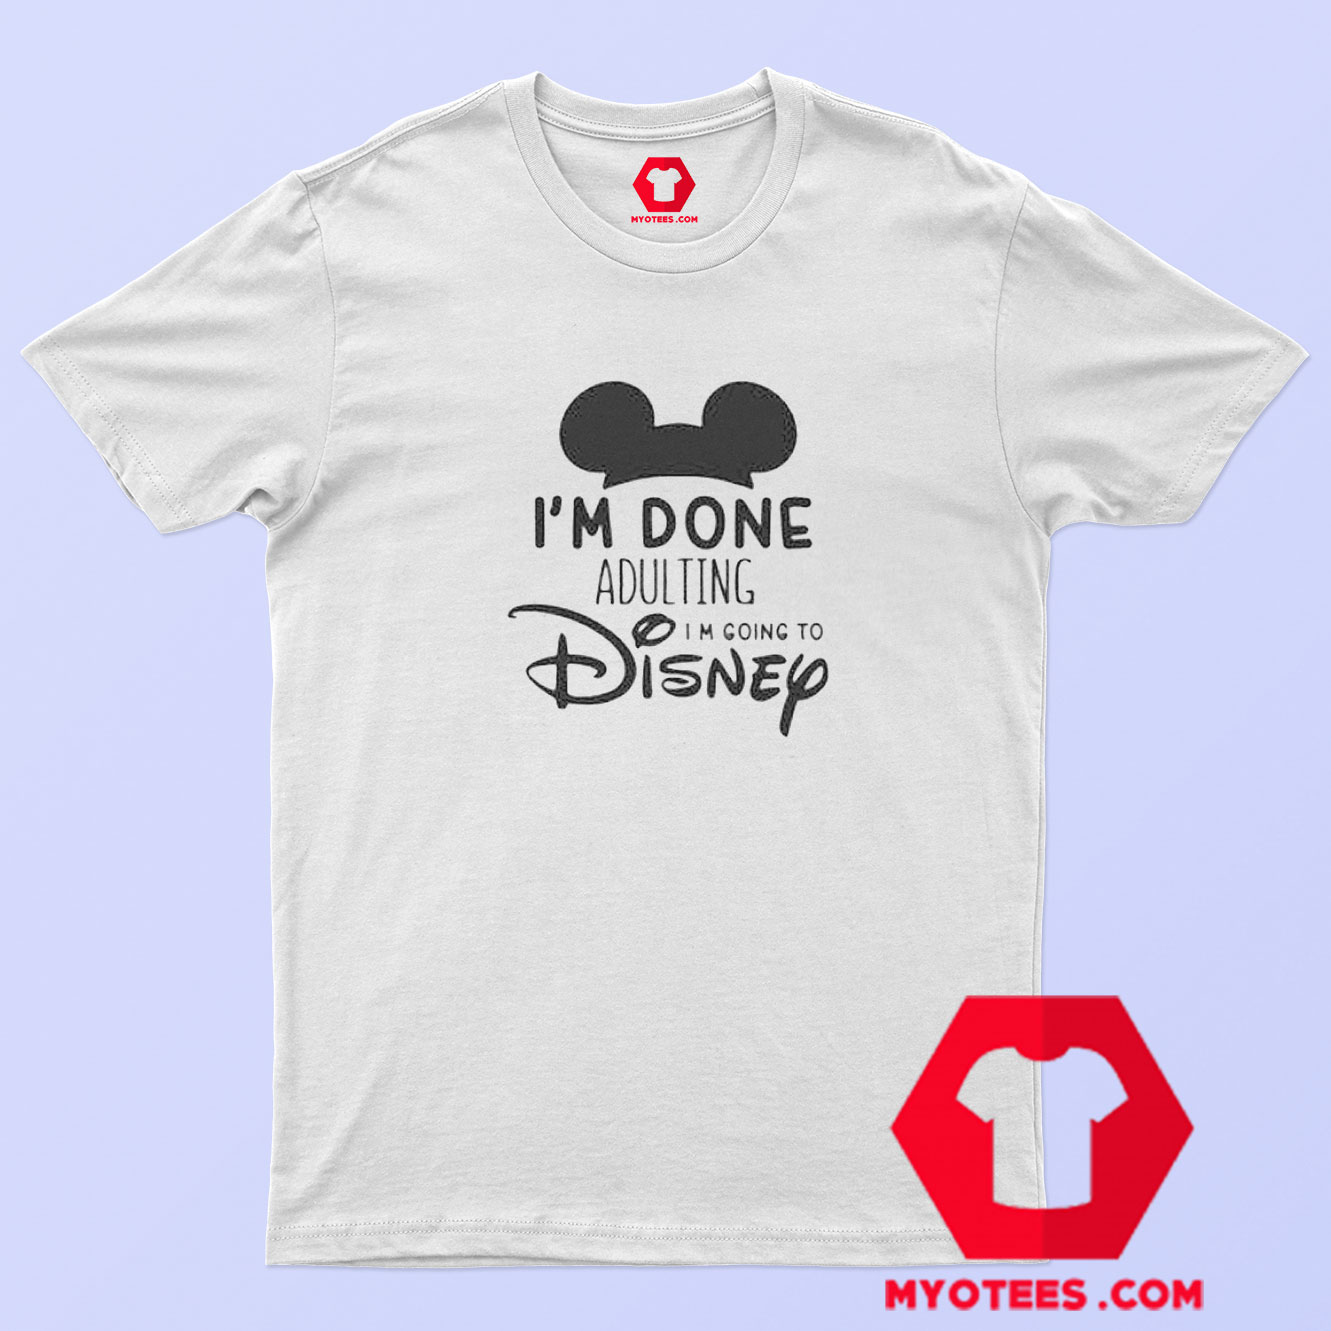 Download Get Buy Iam Done Adulting Disney T Shirt Cheap | MY O TEES